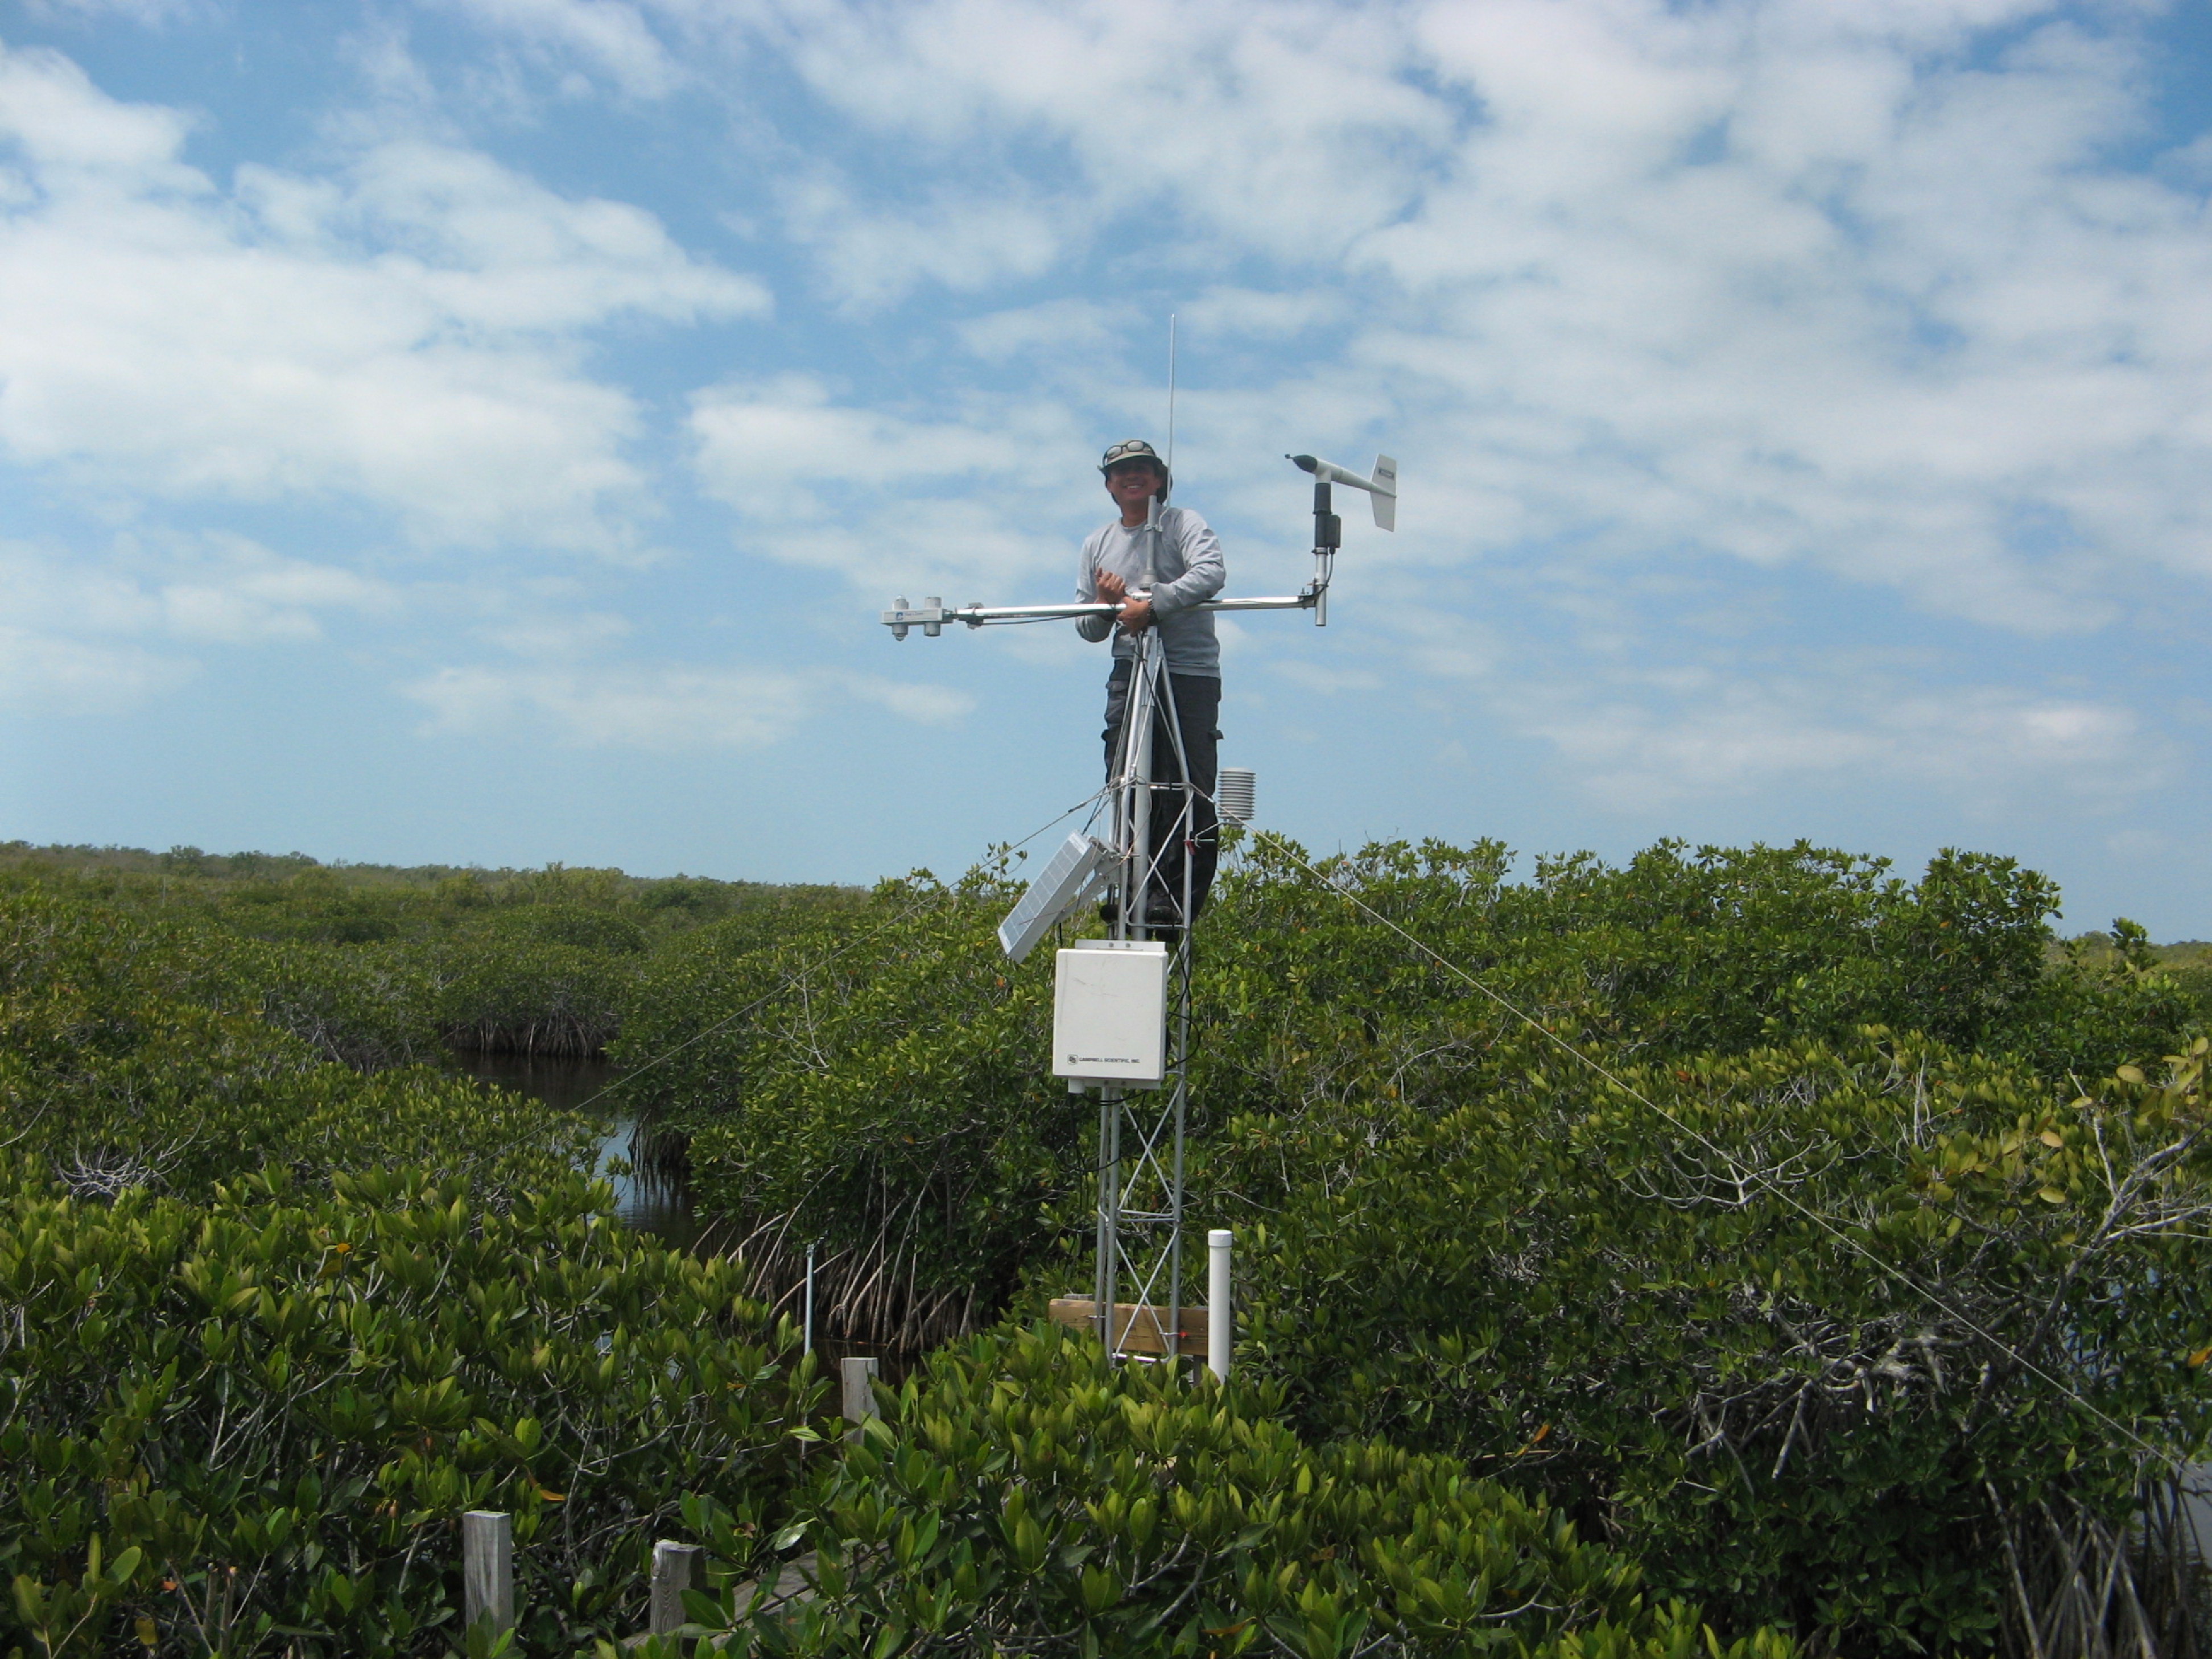 Xavier Zapata (Florida International University Graduate Student) installing a meteorological tower at TS/Ph-7b in Taylor Slough